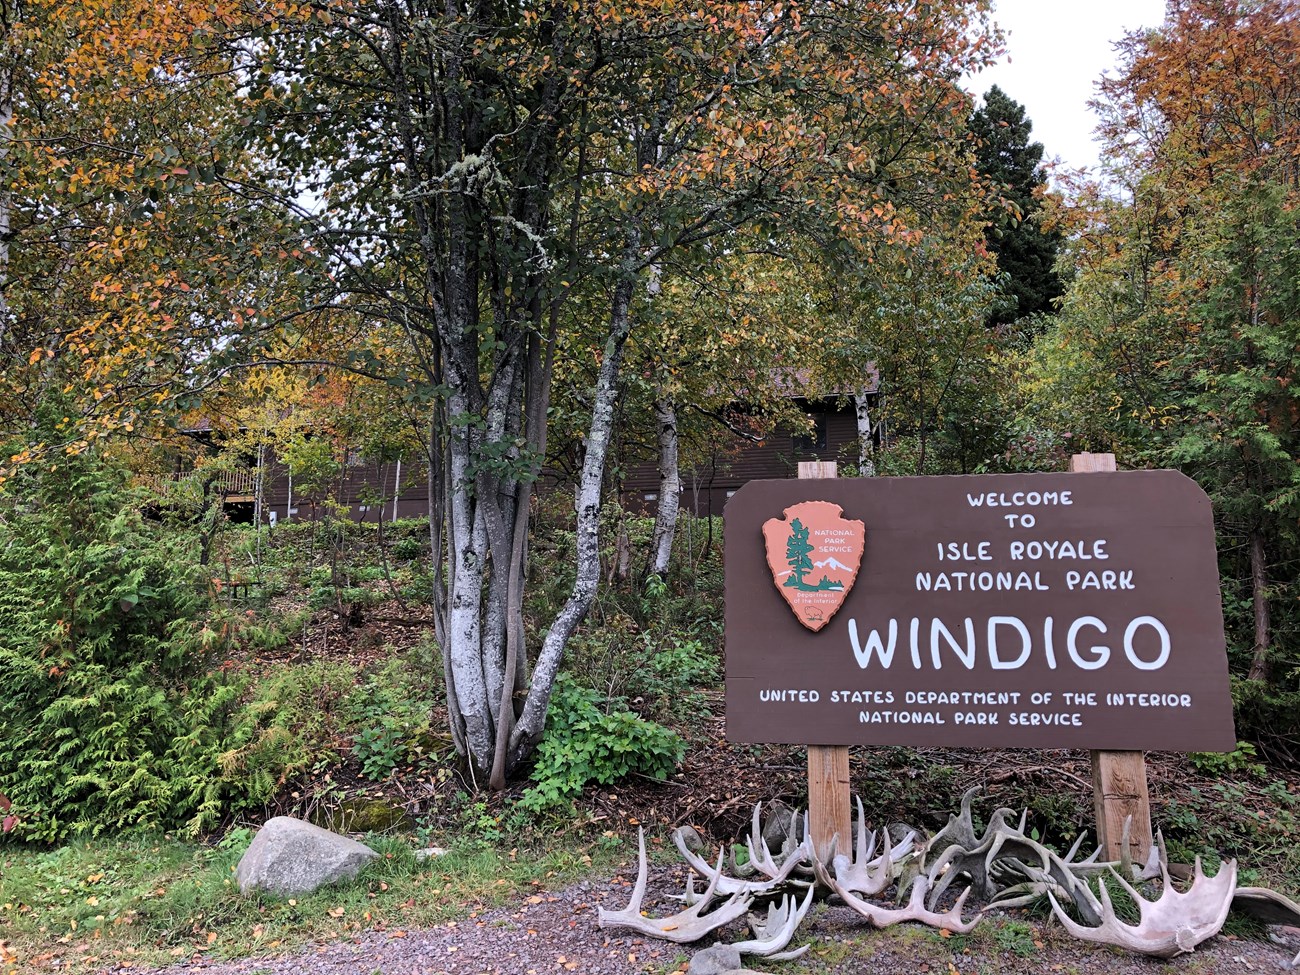 A large brown wooden sign says Windigo in white letters, surrounded by moose antlers and trees.